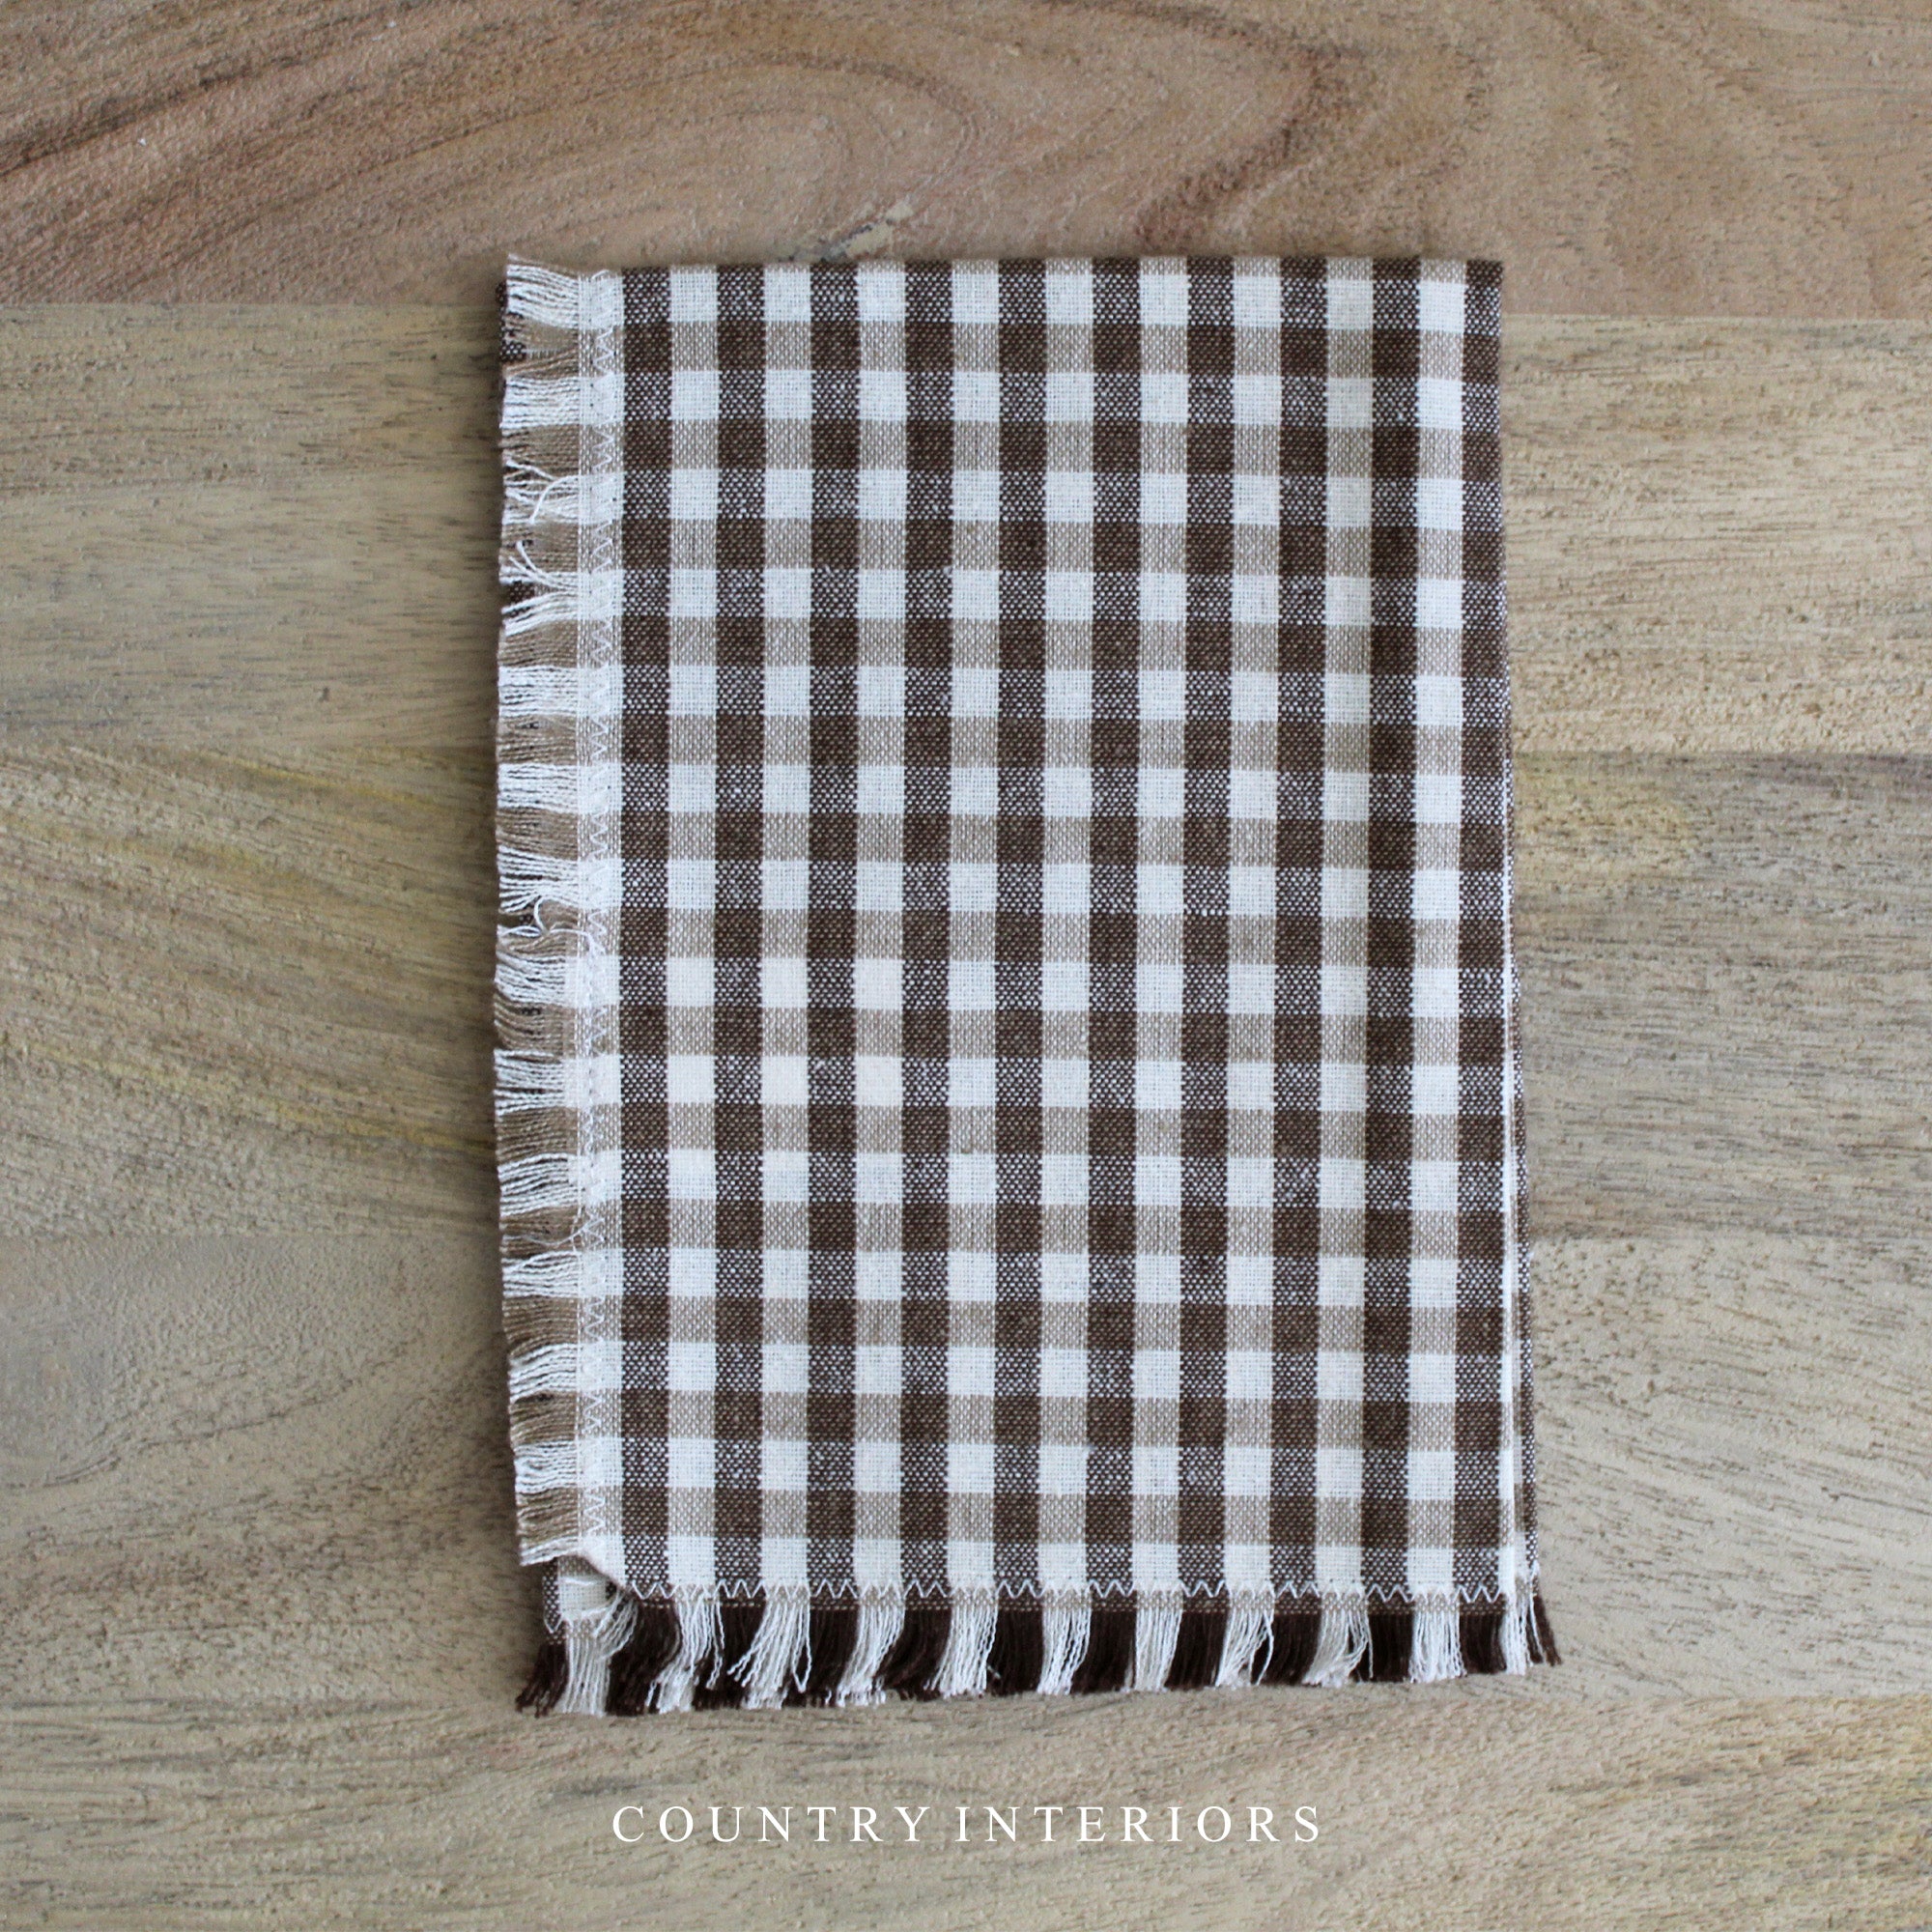 The Pioneer Woman Set of 4 Gingham Woven Fabric Napkins - Each